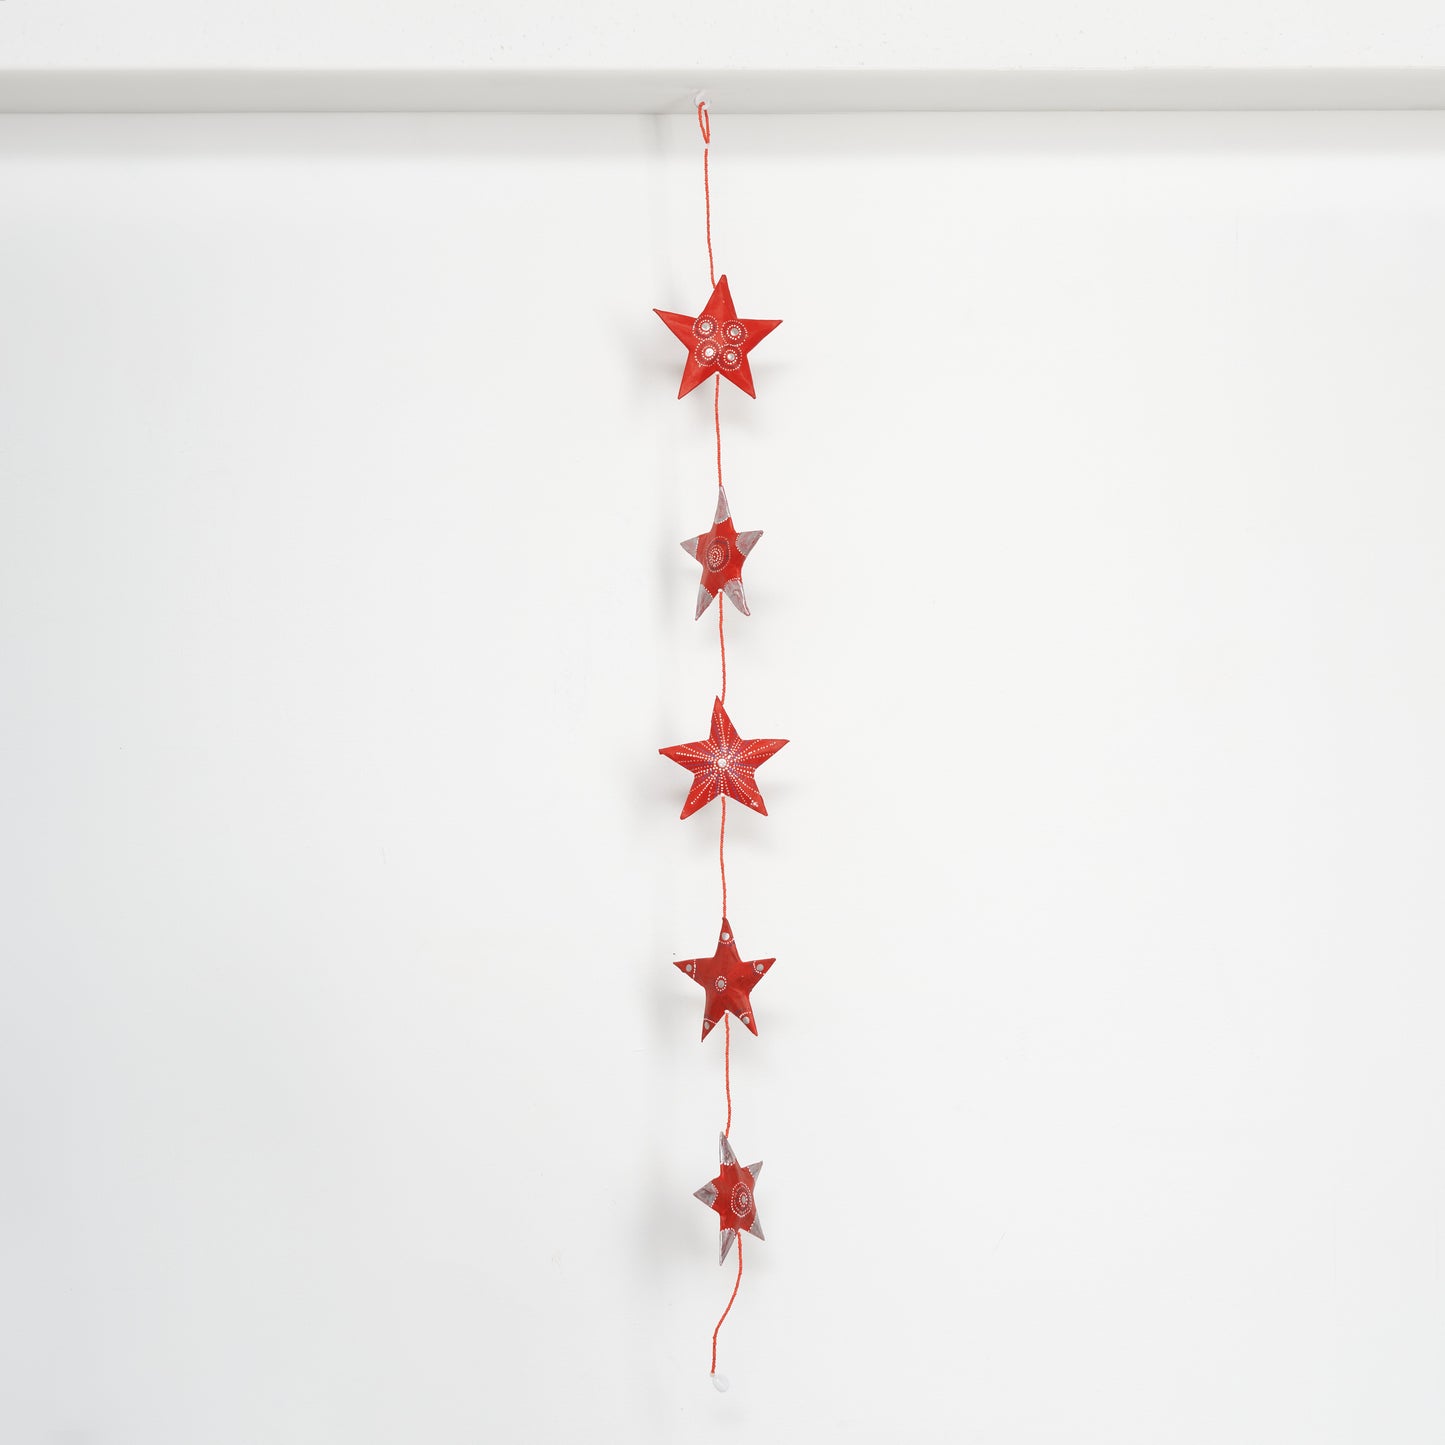 Garland / Mobilé "Stars" made of papier-mâché from recycled paper | Upcycling, handmade